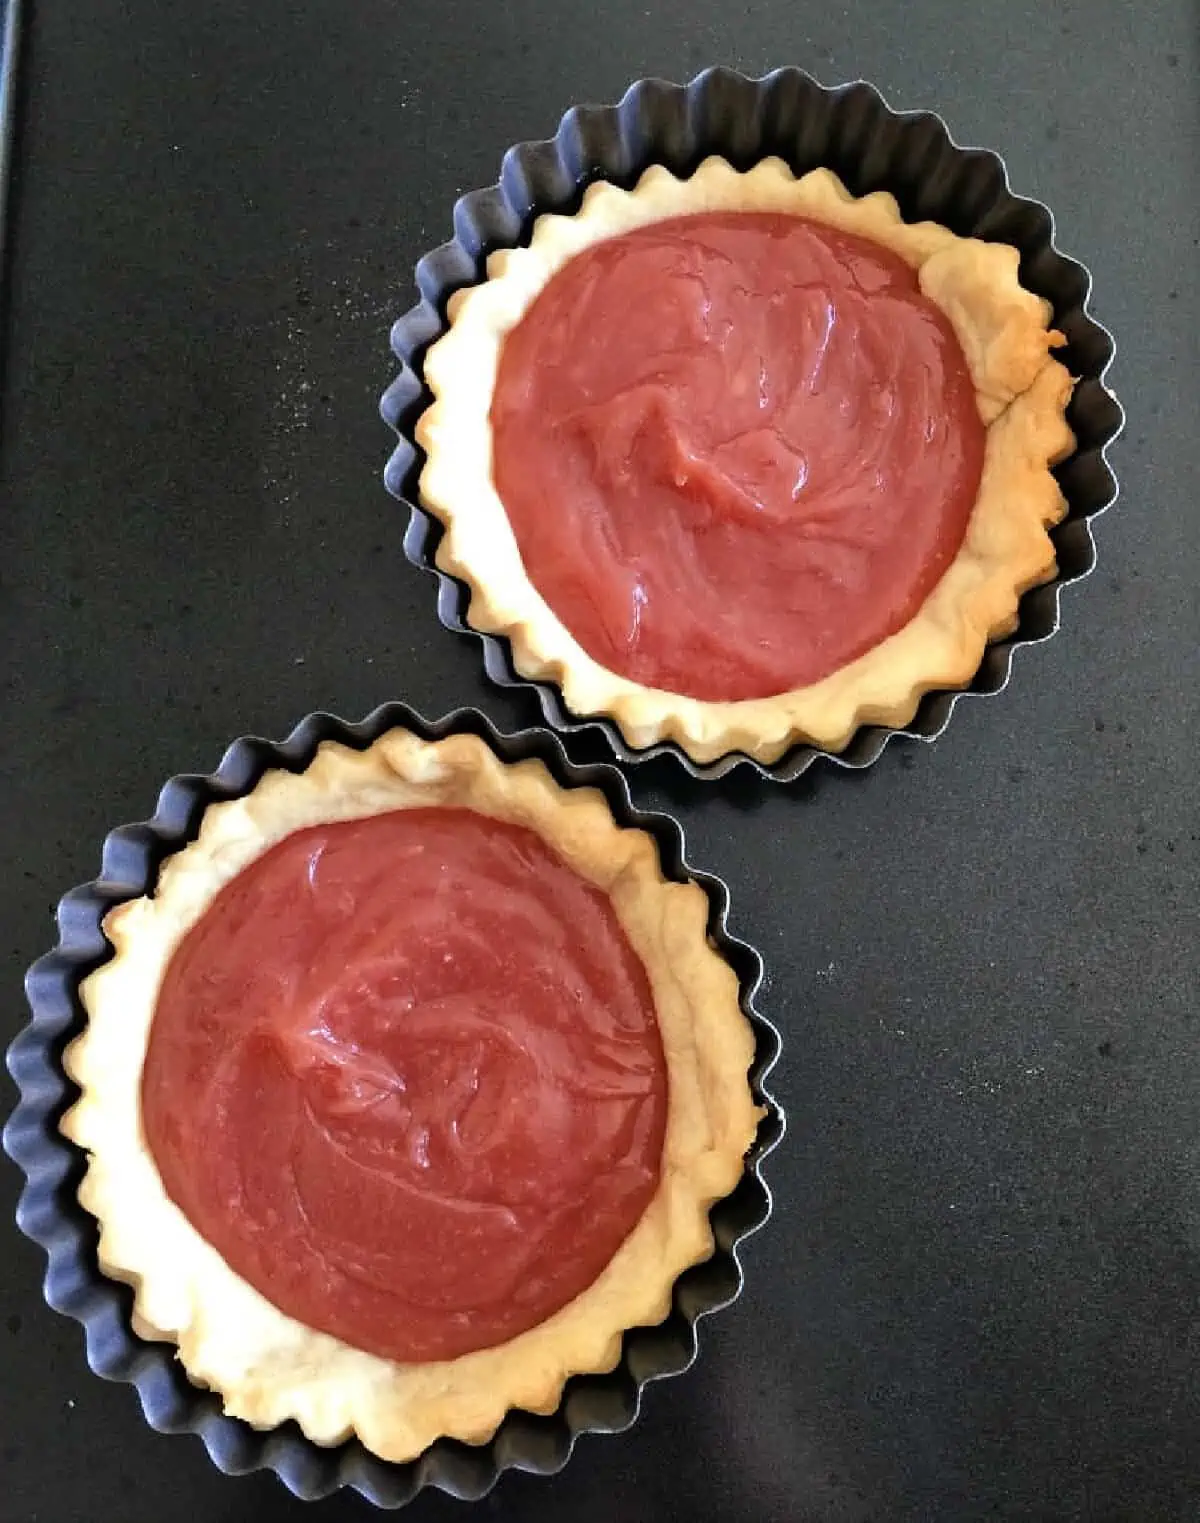 Two tart shells filled with pink curd.